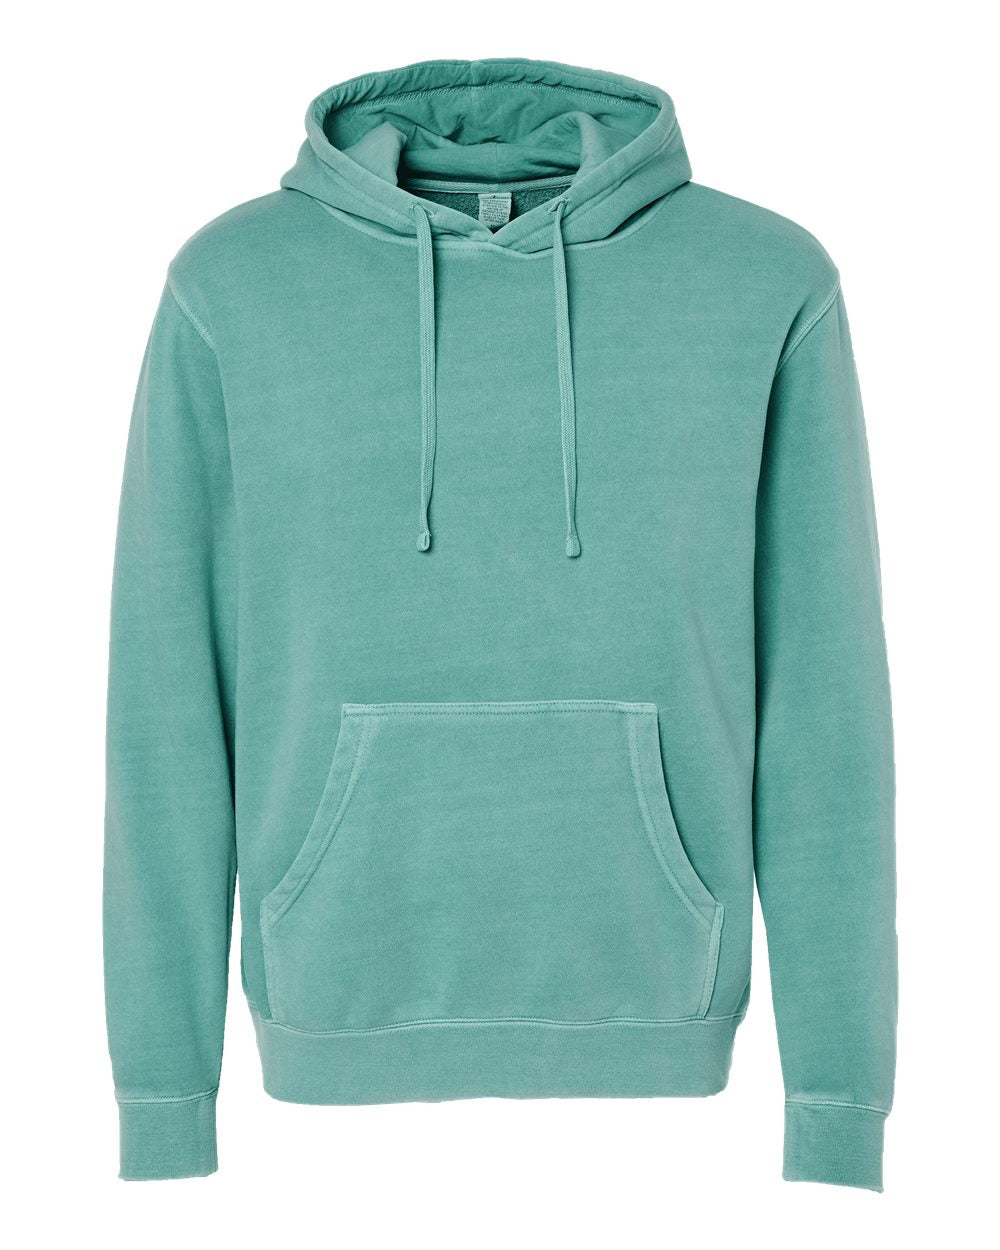 Independent Pigment-Dyed Hoodie (PRM4500) in Pigment Mint